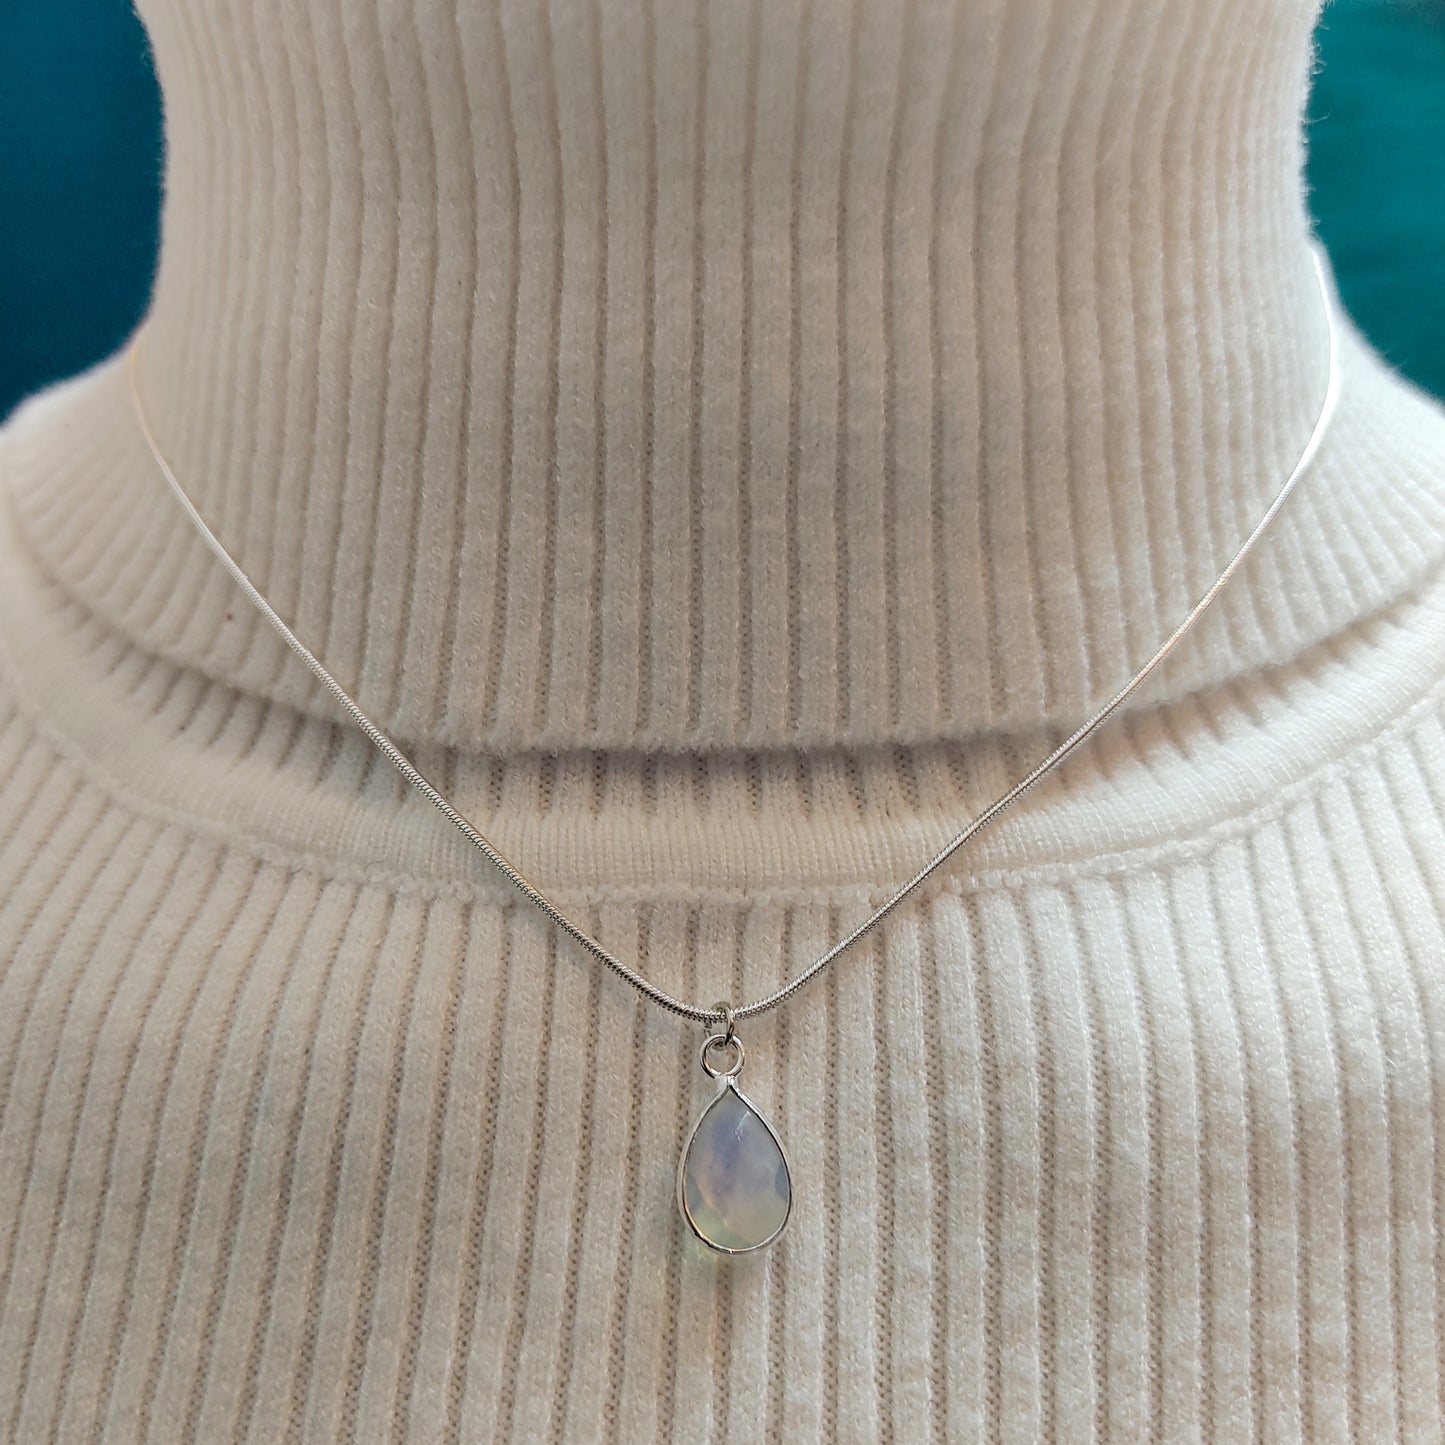 Minimalist Necklace Gift - Opal Crystal Gemstone Water Drop - Jewelry Love Gift